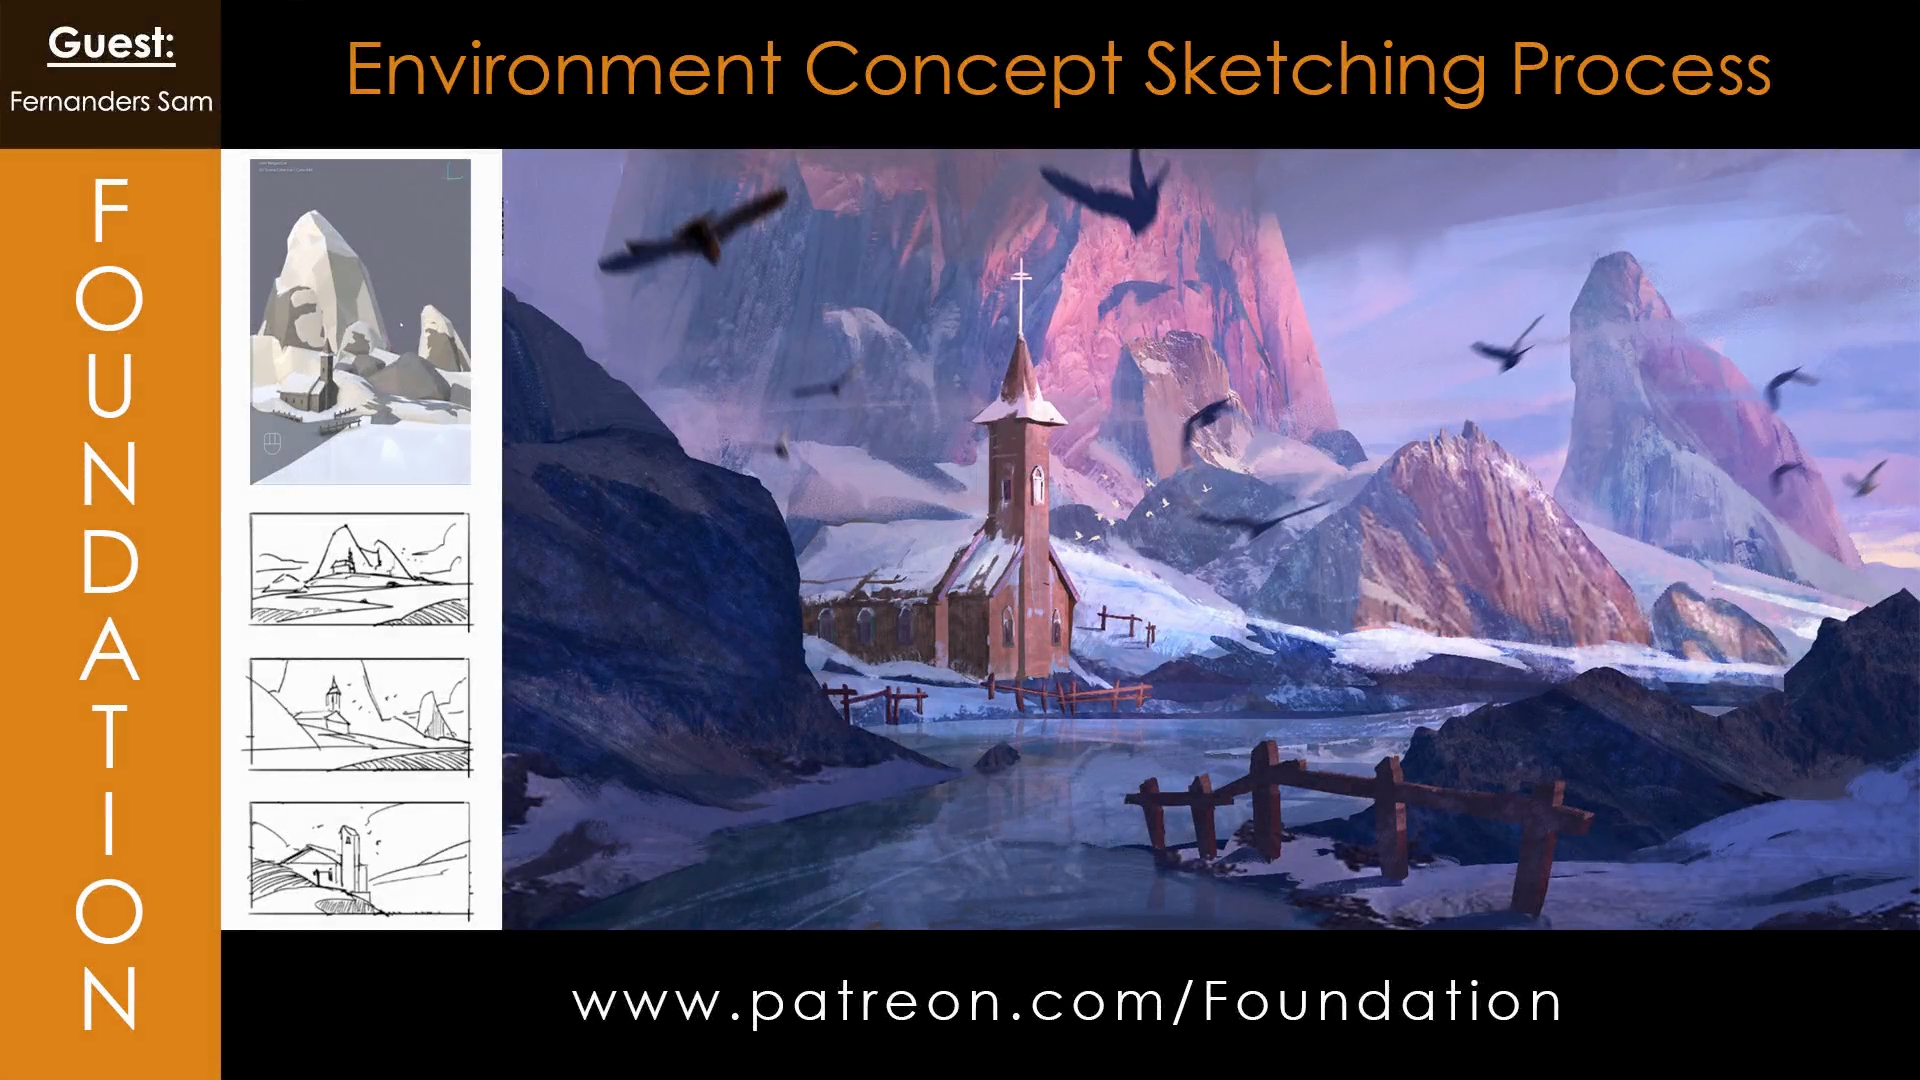 Environment Concept Sketching Process with Fernanders Sam